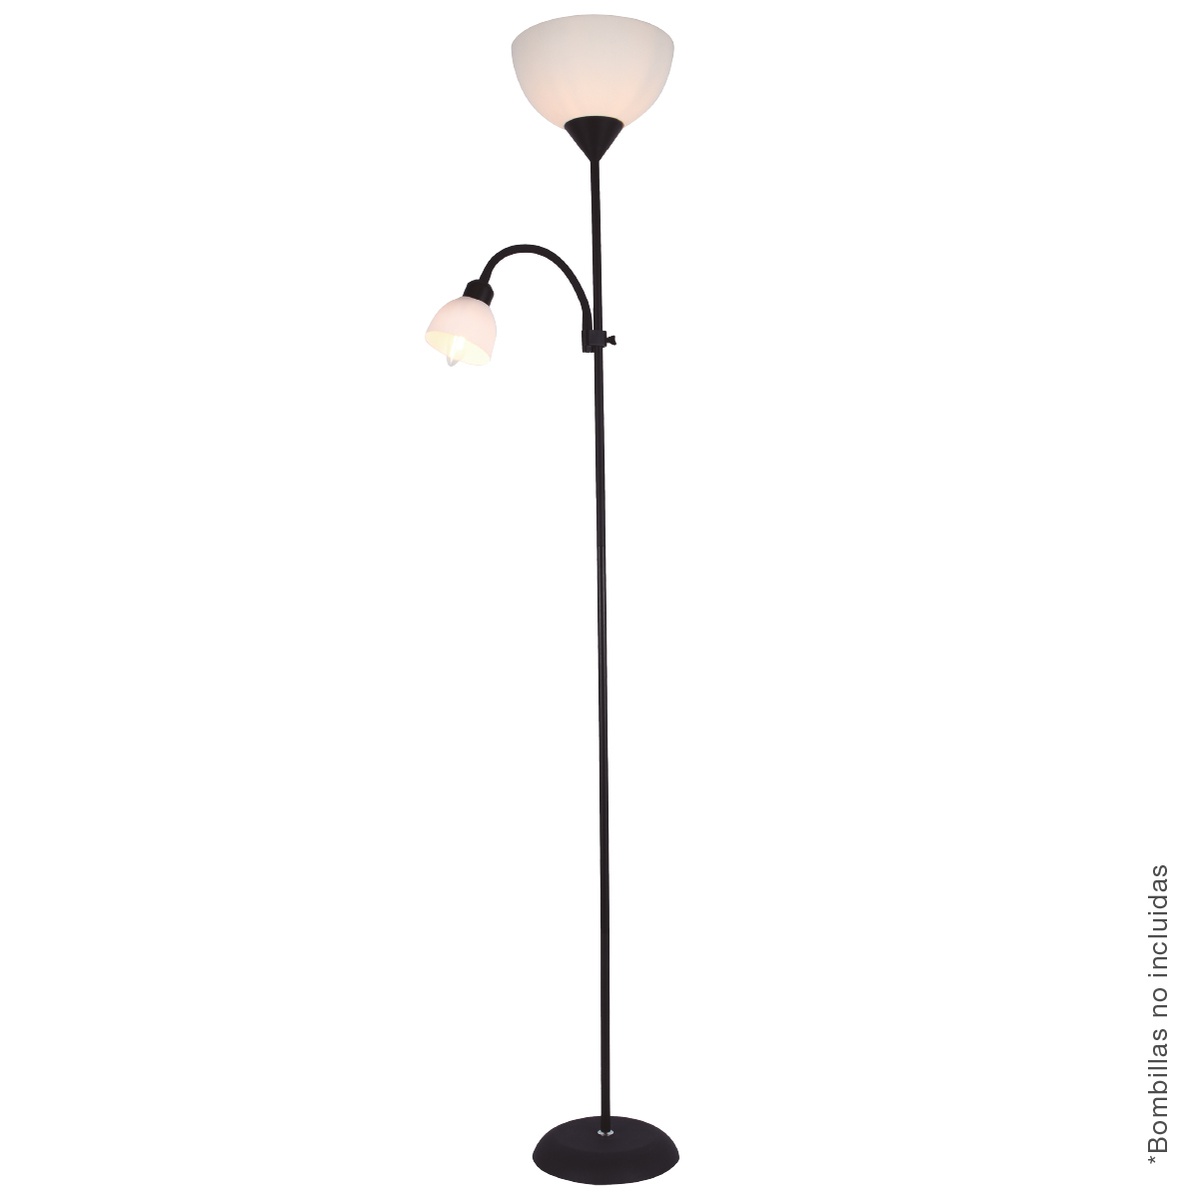 Nawis series floor lamp 1760mm E27 with reading lamp E14 black